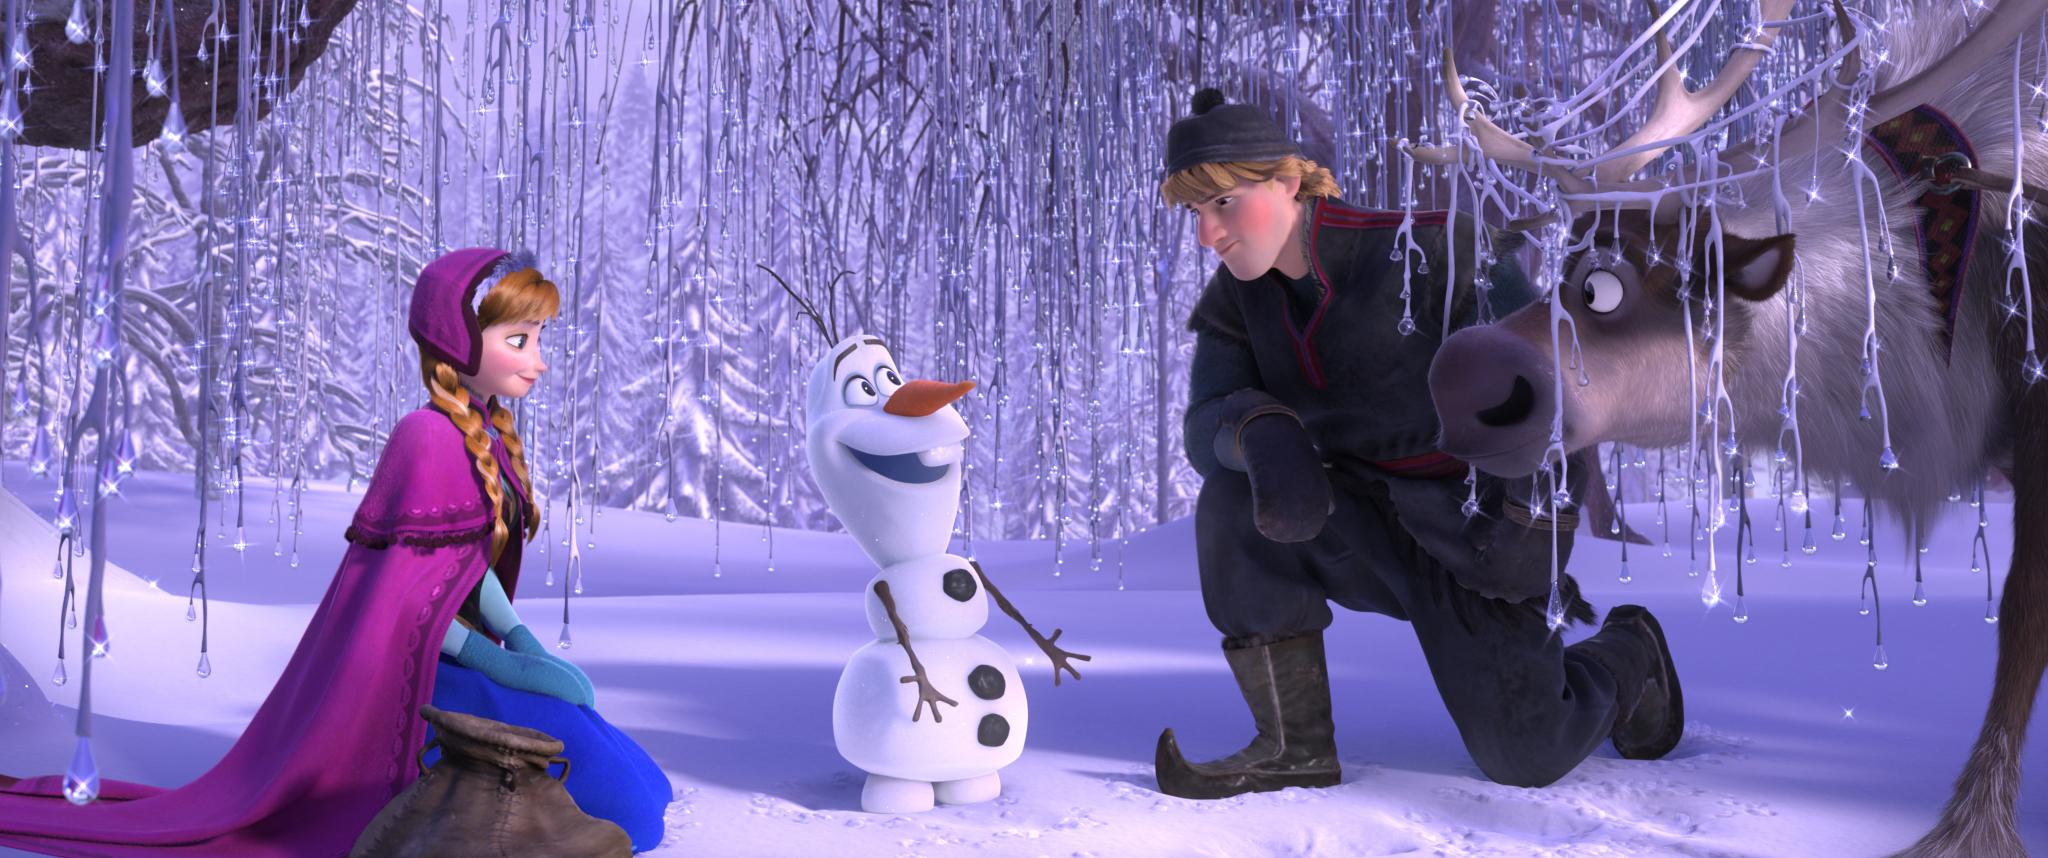 Disney’s ‘Frozen 2’ Is Finally Coming To Theaters!